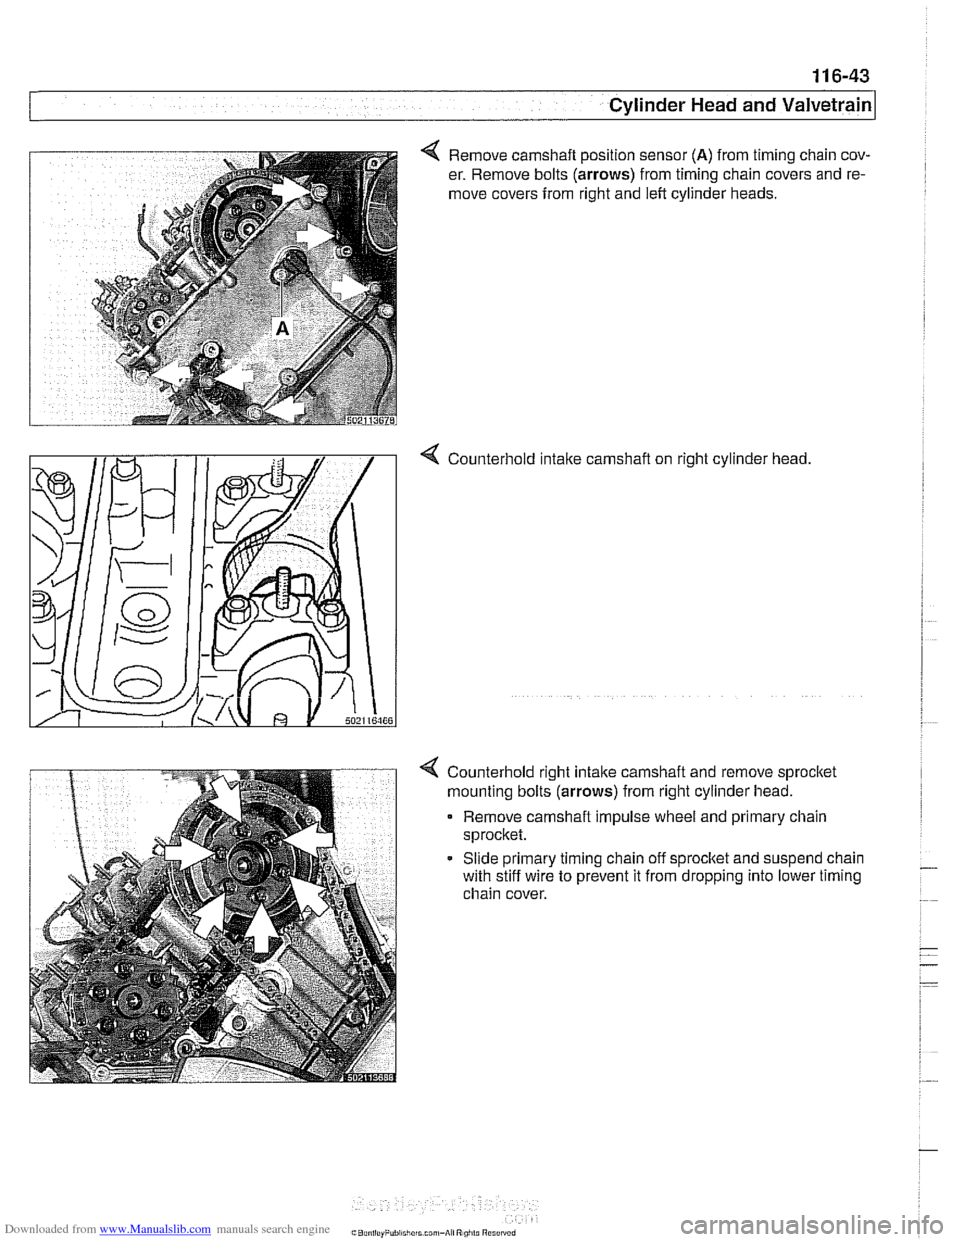 BMW 525i 2001 E39 Workshop Manual Downloaded from www.Manualslib.com manuals search engine 
Cylinder Head and valvetrain1 
4 Remove camshaft position sensor (A) from timing chain cov- 
er.  Remove bolts 
(arrows) from timing chain cov